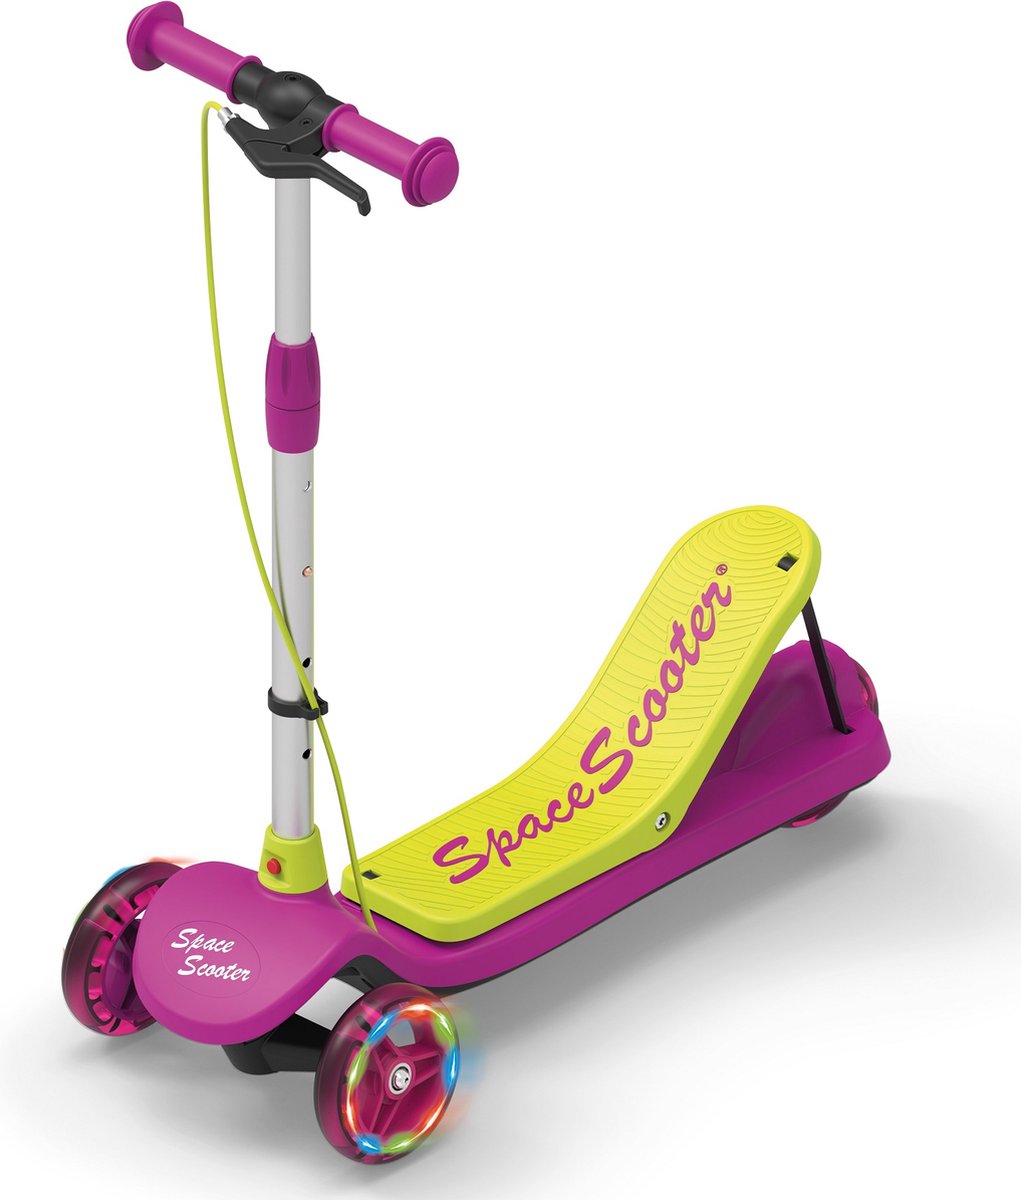 Space Scooter Mini X260 - Roze